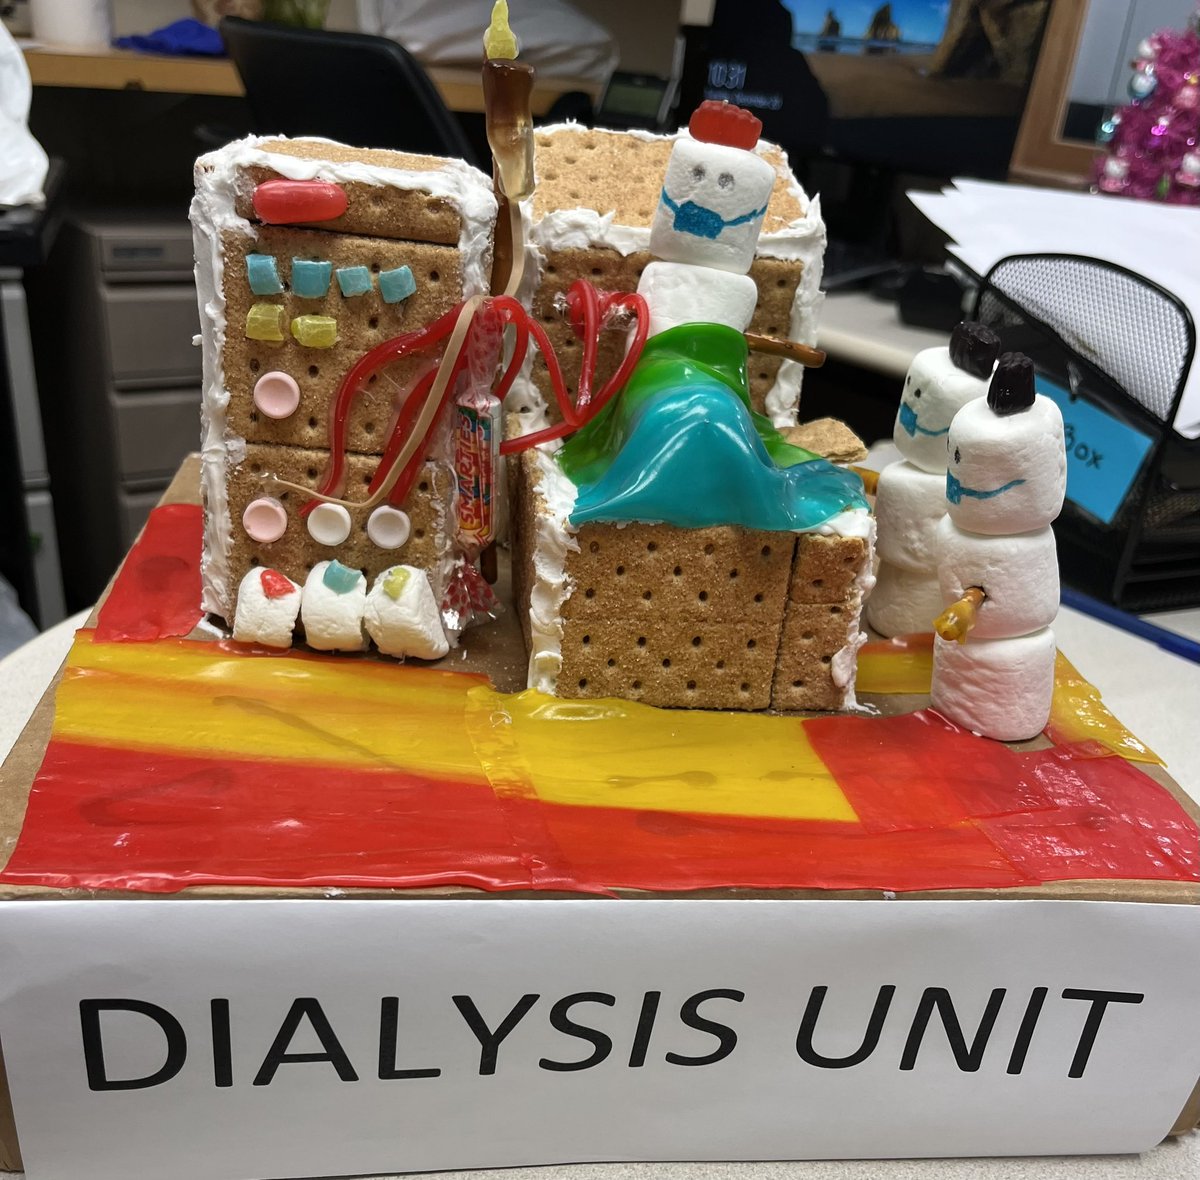 ‘Gingerbread house competition’ entry by our very talented VA dialysis staff. Loved the attention to detail! 💜@DeptVetAffairs @YaleNephrology